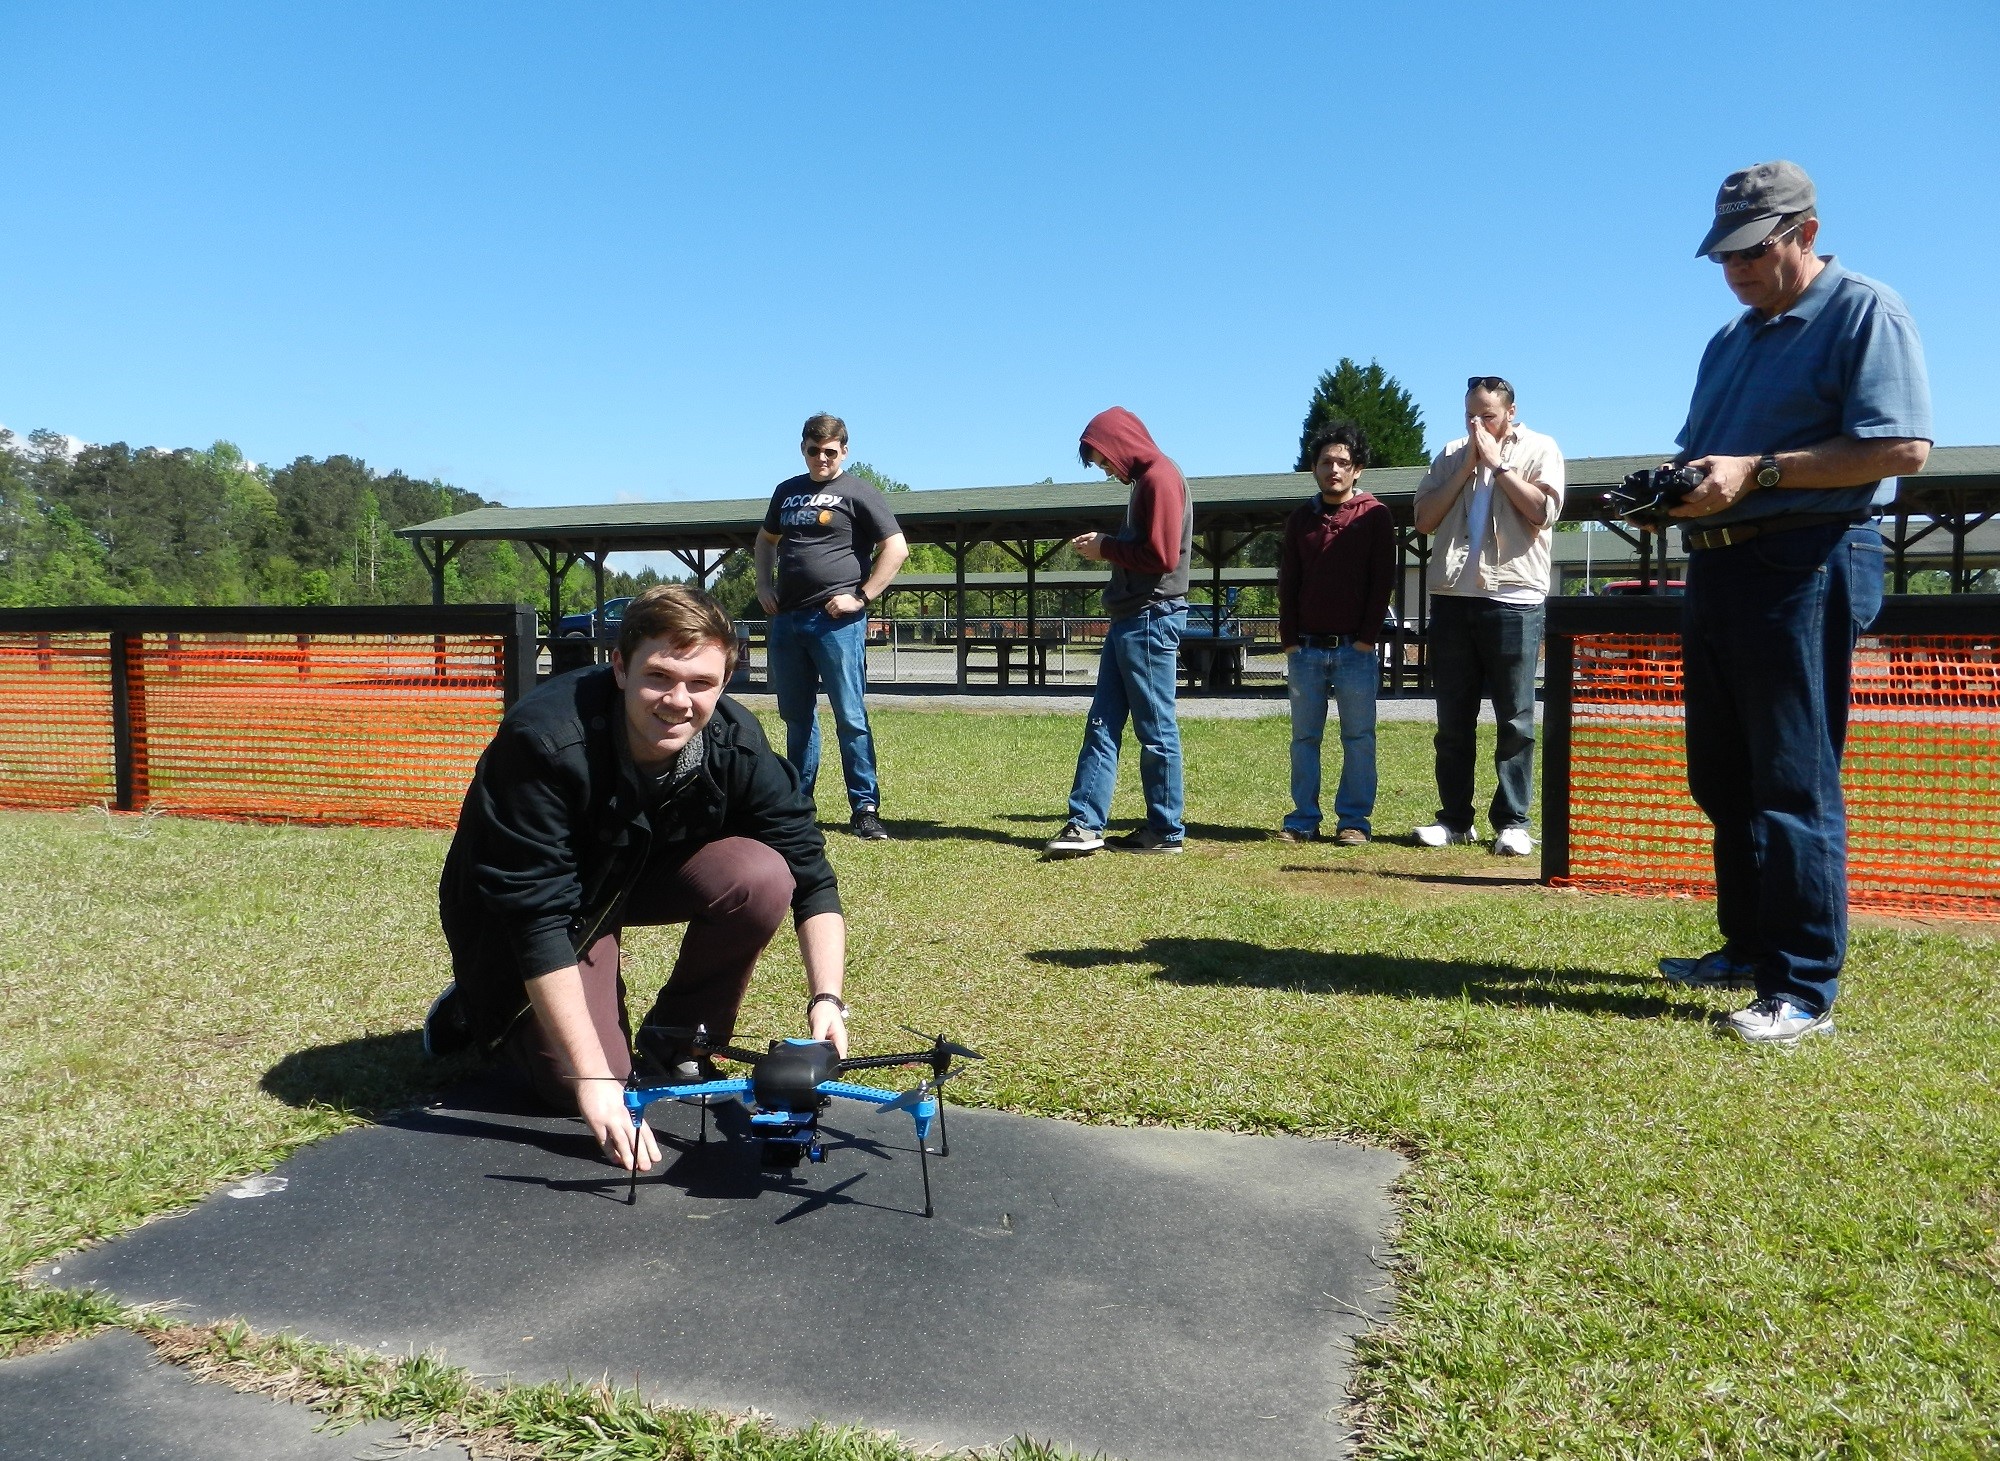 MAPSAN teammate smiling next to the quadcopter